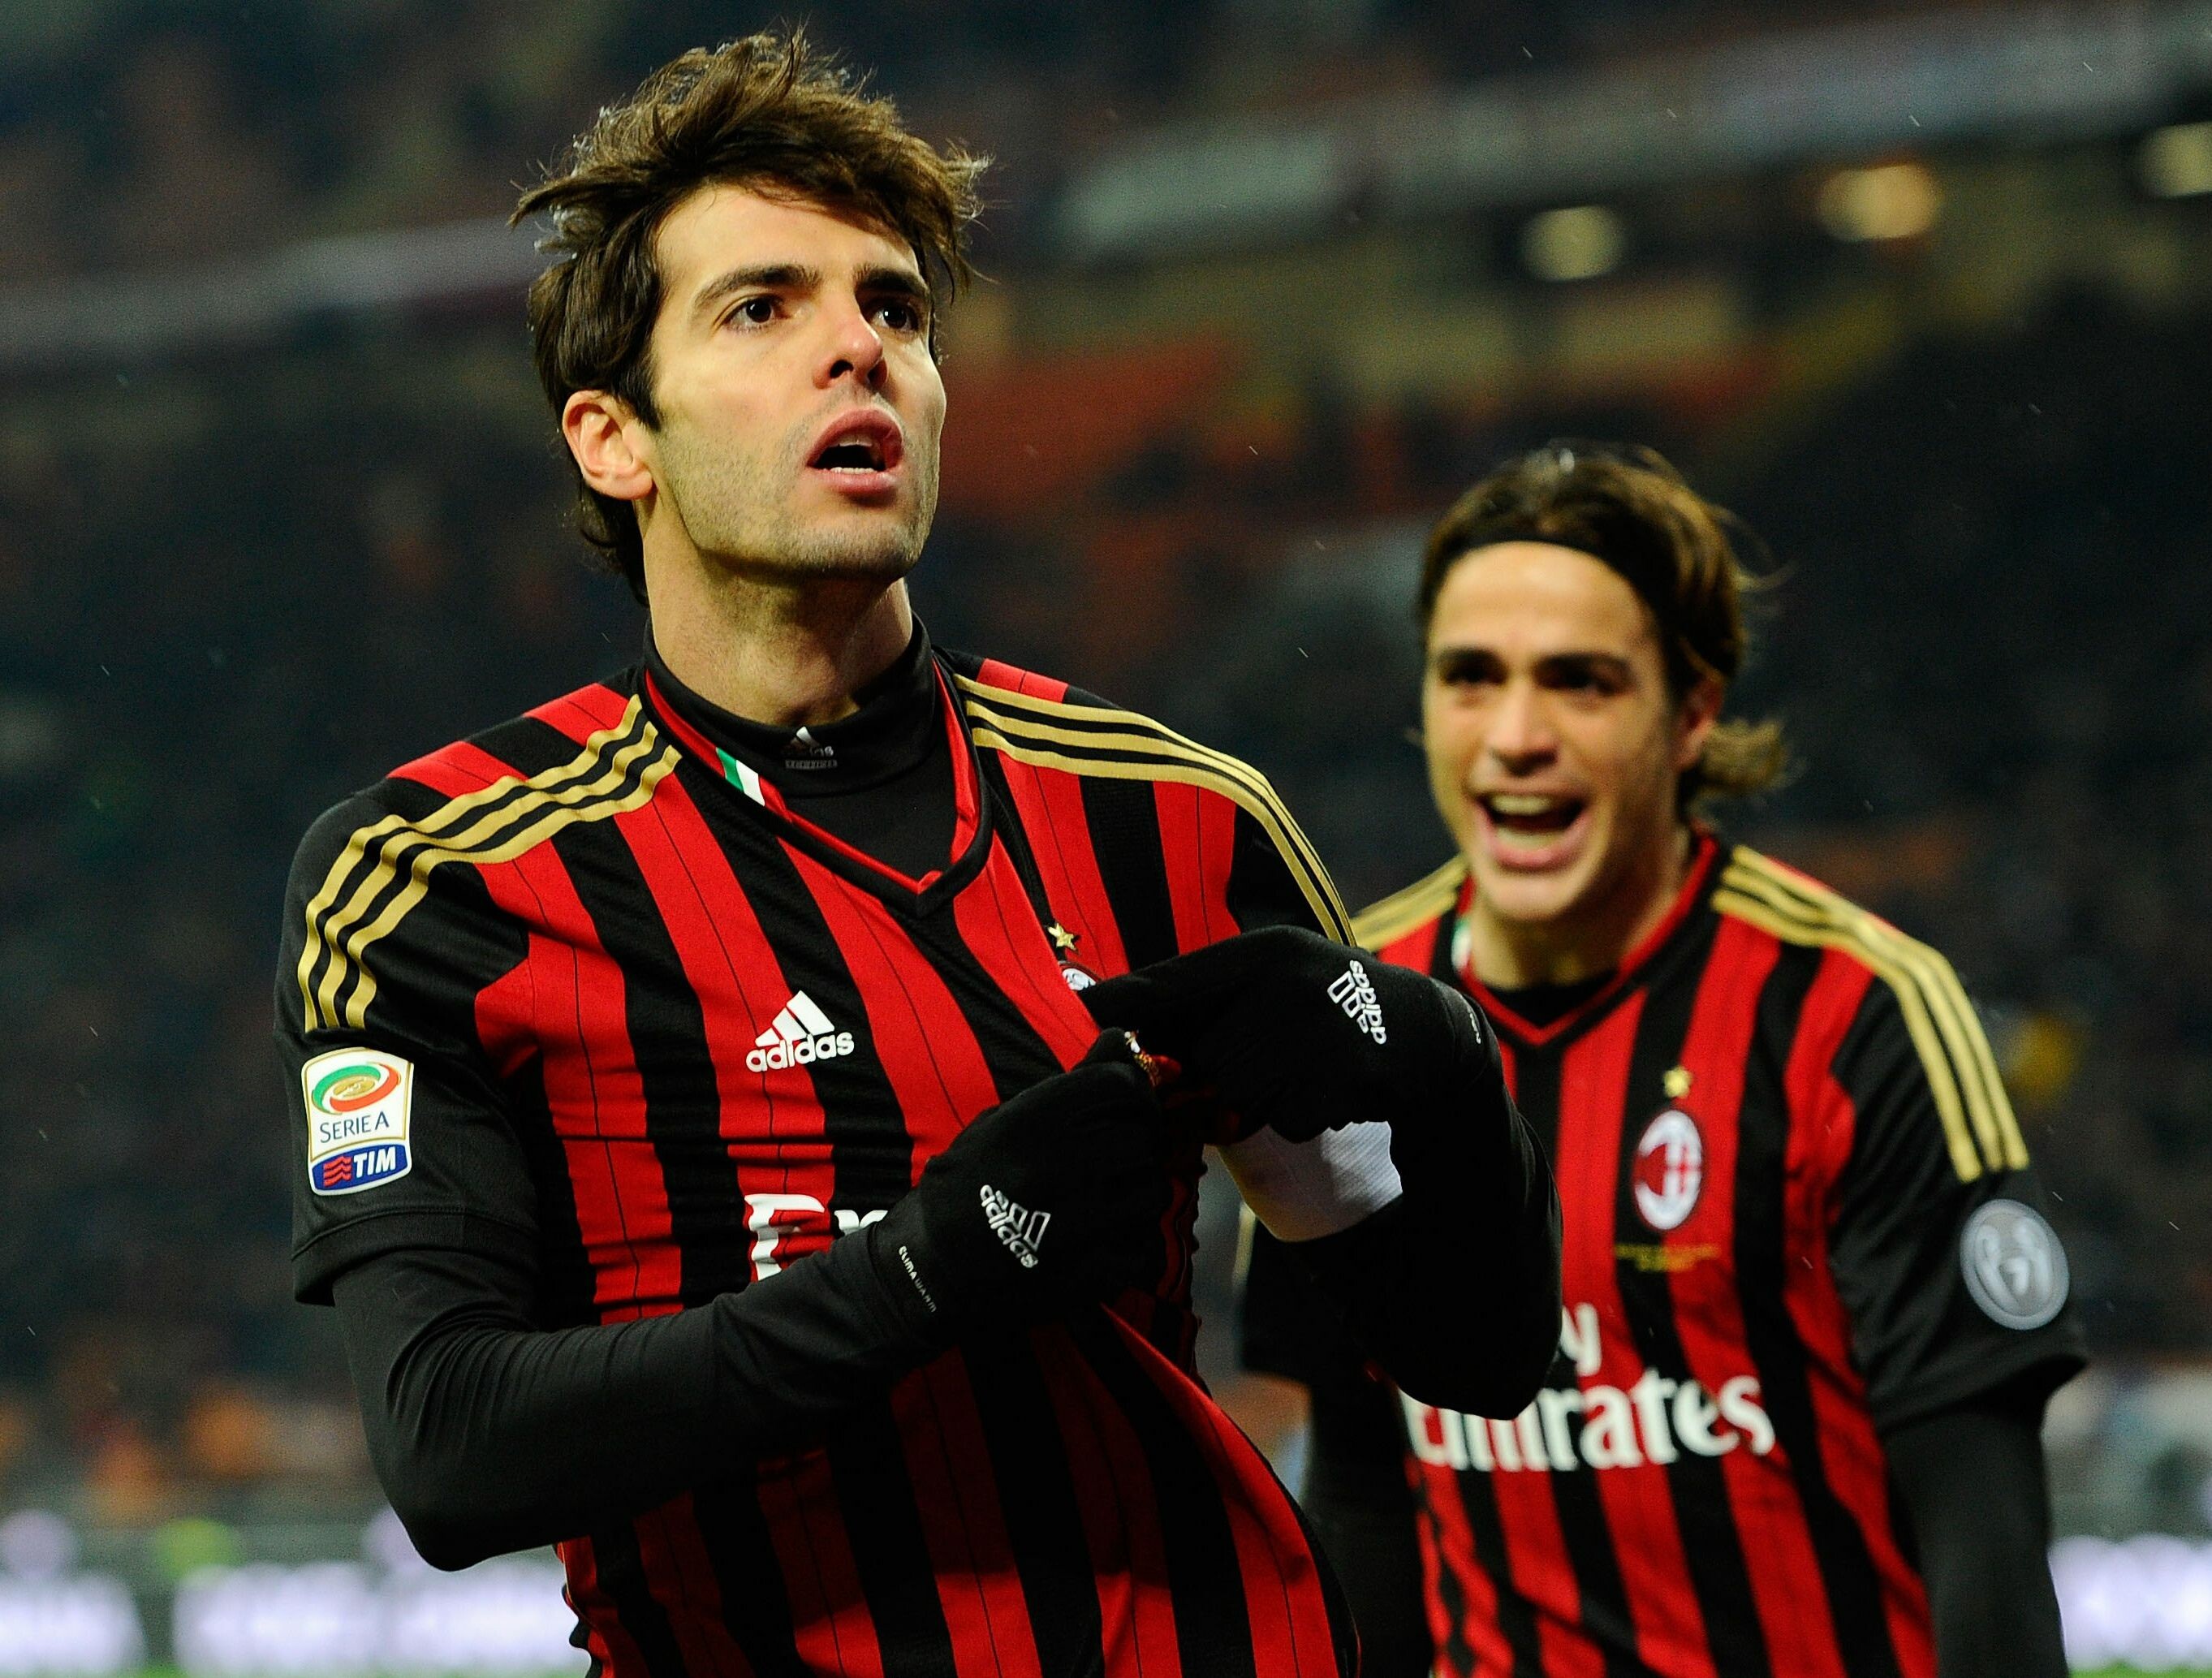 Kaká: A playmaker at AC Milan, Considered one of the best players of his generation. 2730x2070 HD Wallpaper.